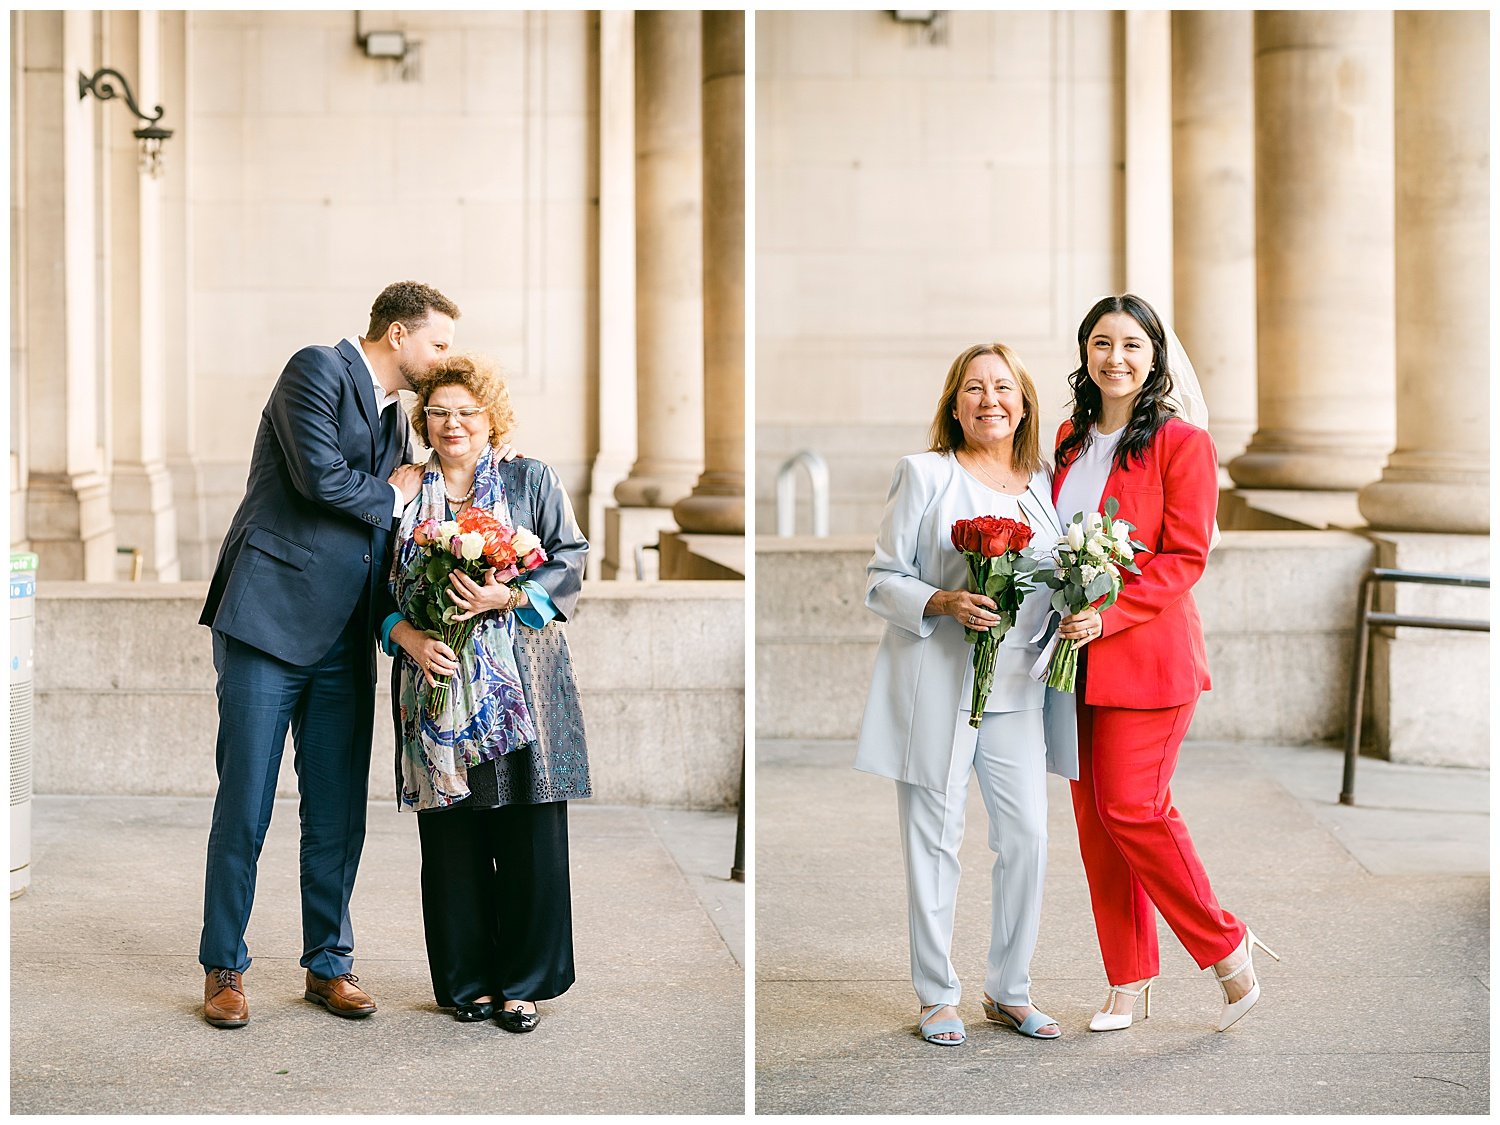 Brooklyn-City-Hall-Wedding-Photography-Courthouse-Elopement-Apollo-Fields-02.jpg